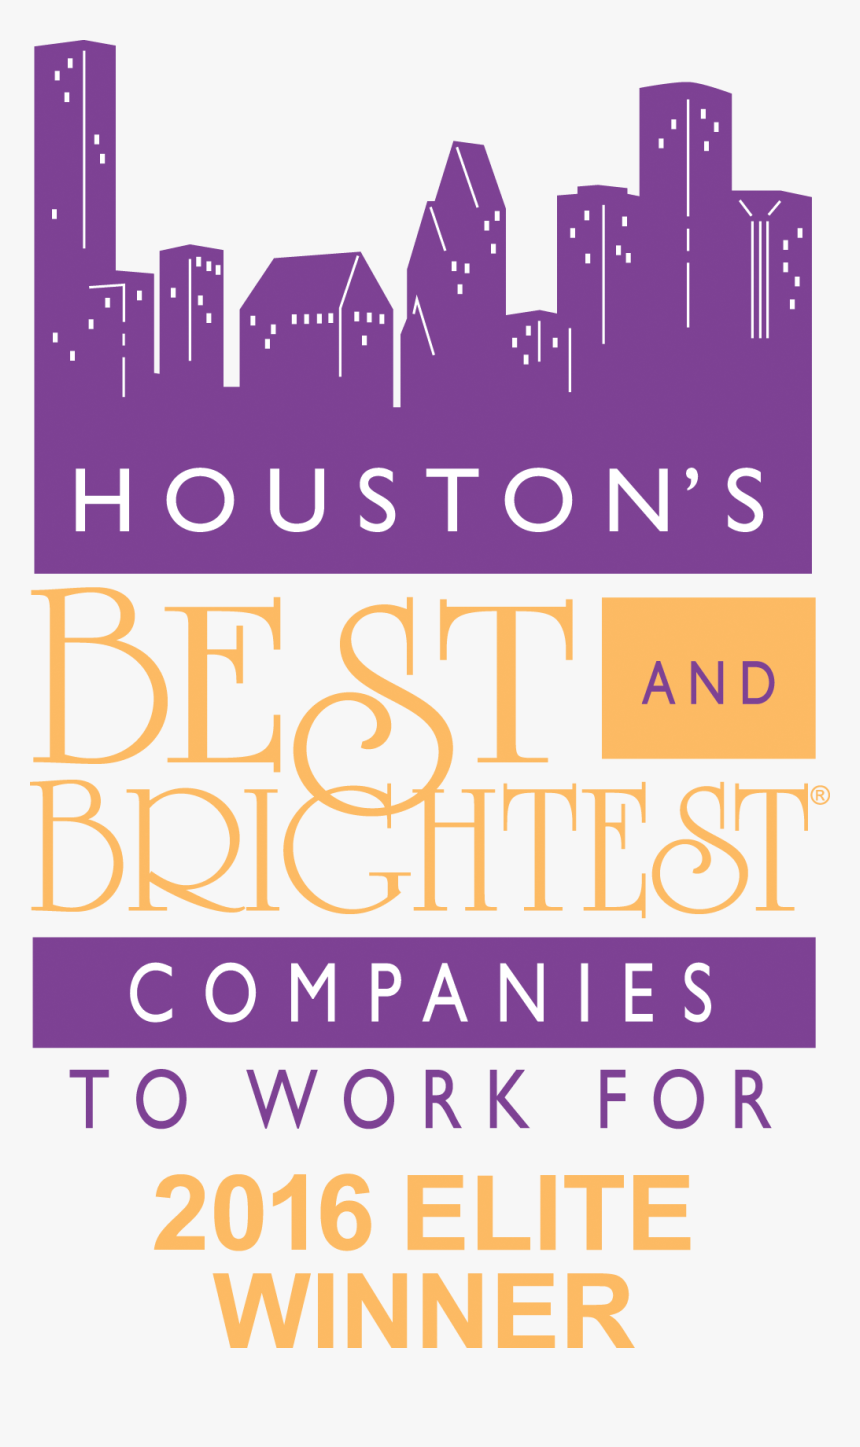 Houston’s Best And Brightest Companies To Work For, HD Png Download, Free Download